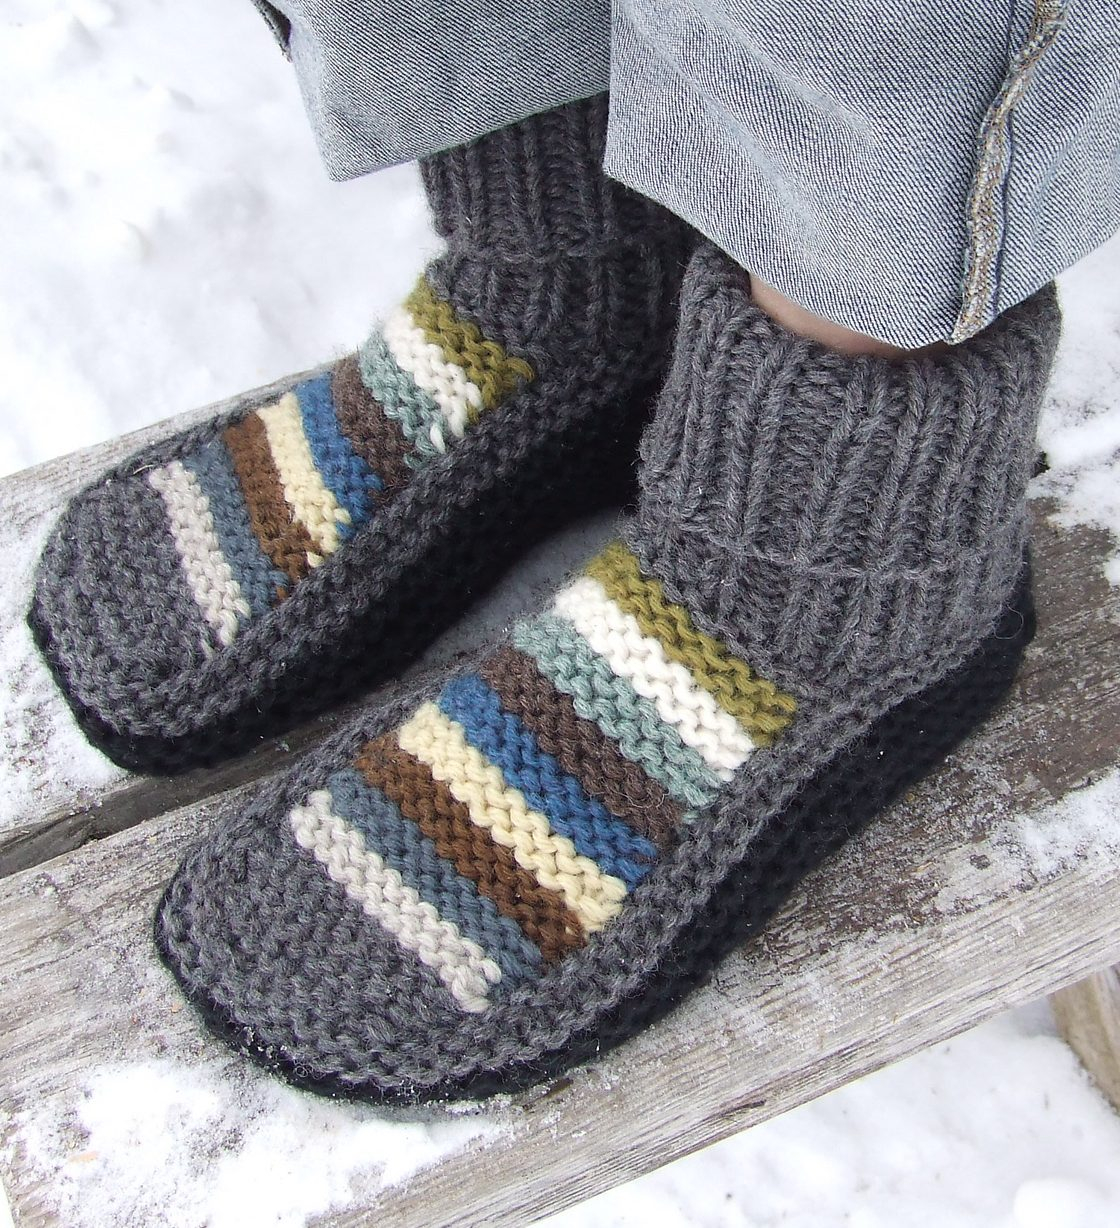 Converse Knitted Slippers Pattern Free Knitting Slipper Patterns For Adults